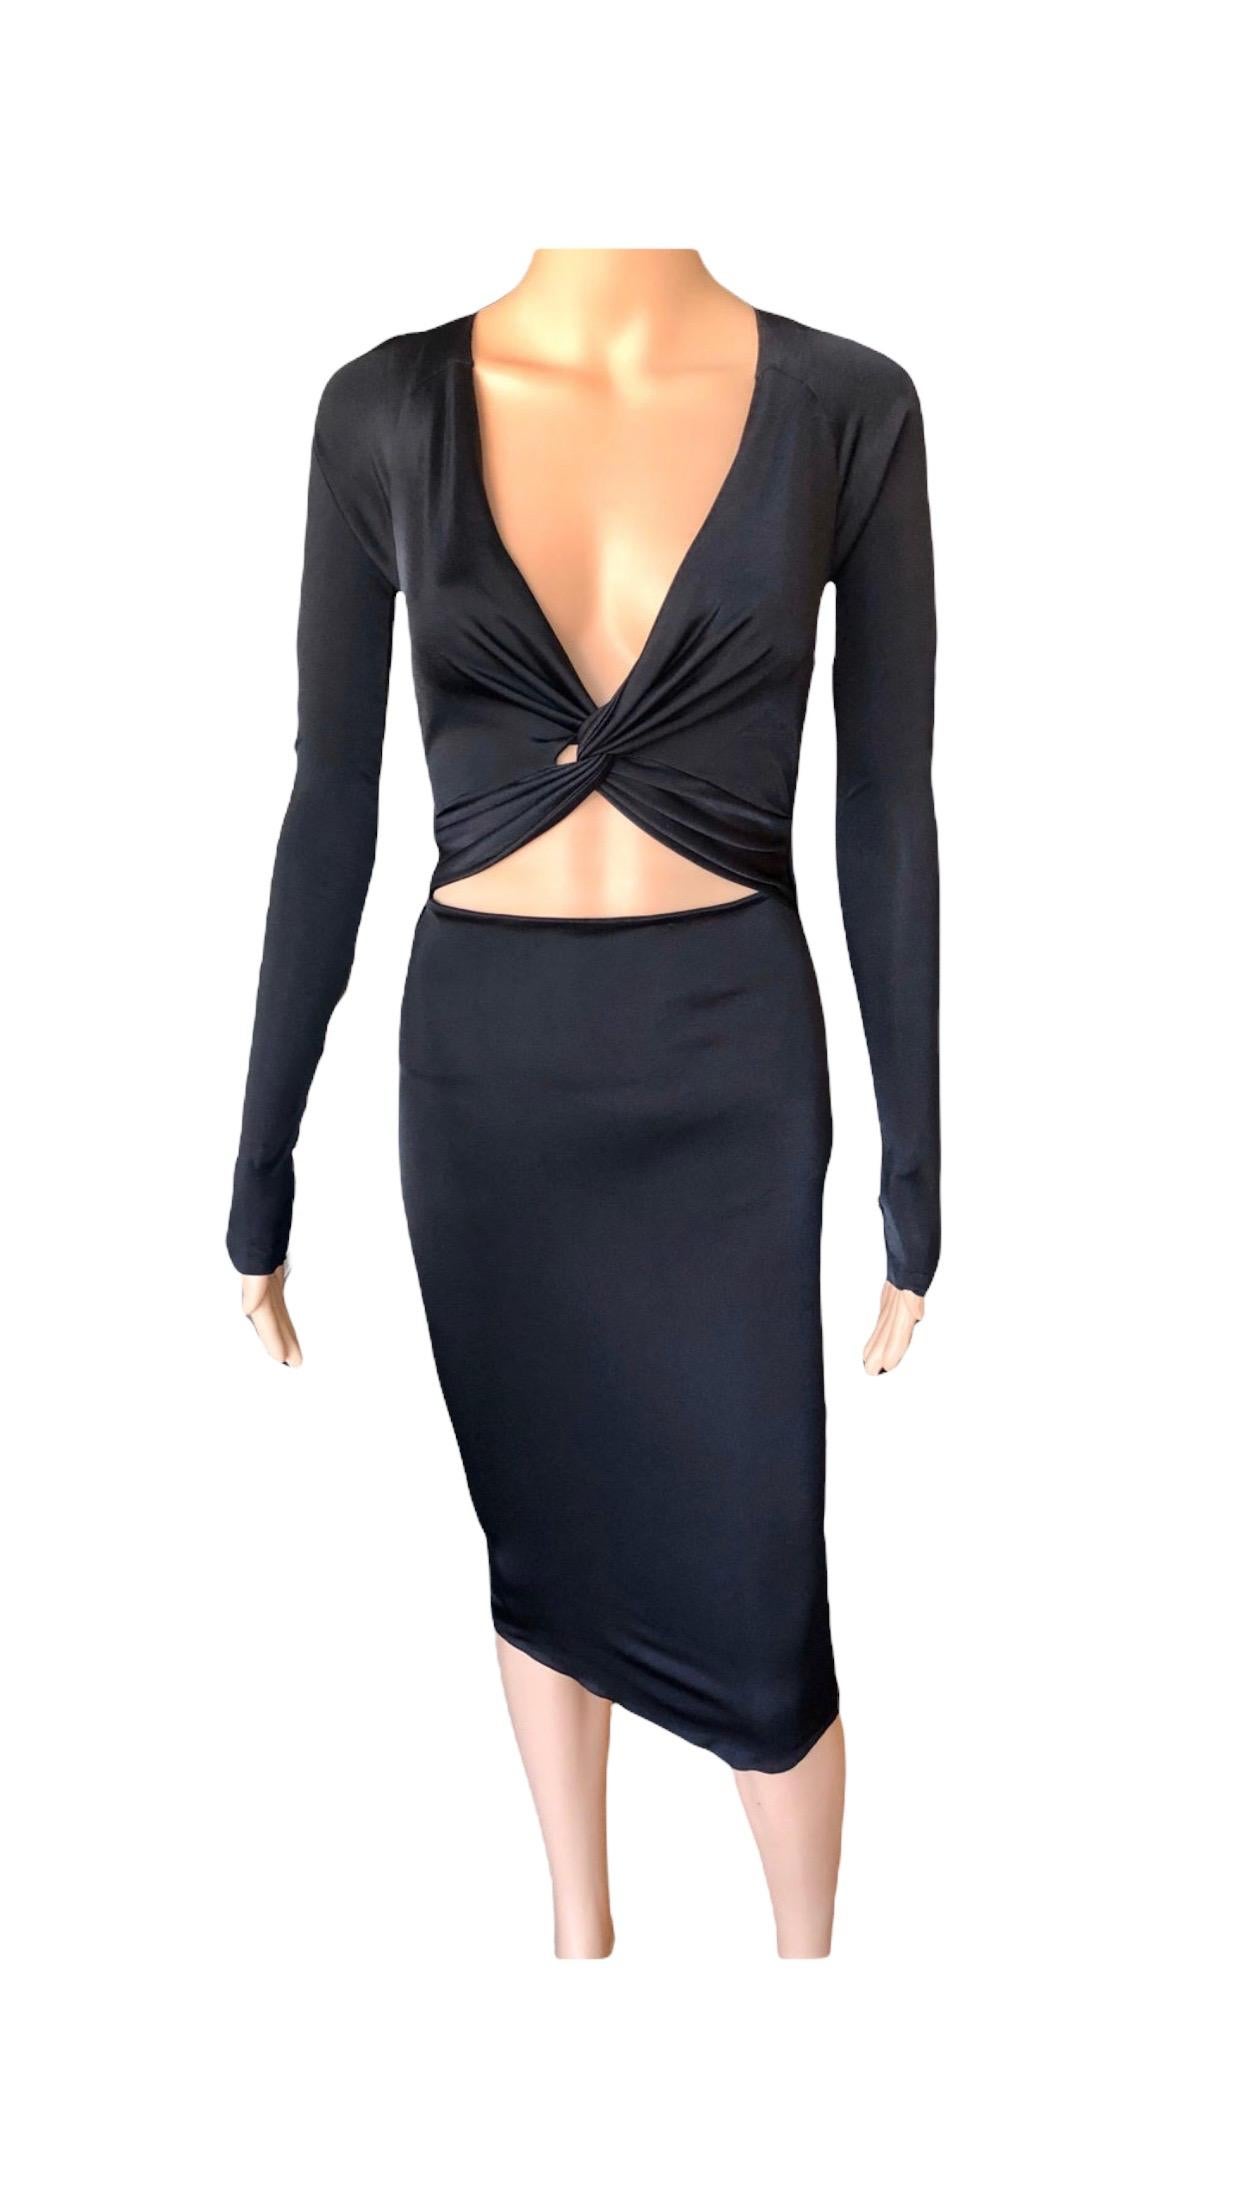 Gucci S/S 2005 Tom Ford Plunging Cutout Backless Bodycon Black Dress en vente 6